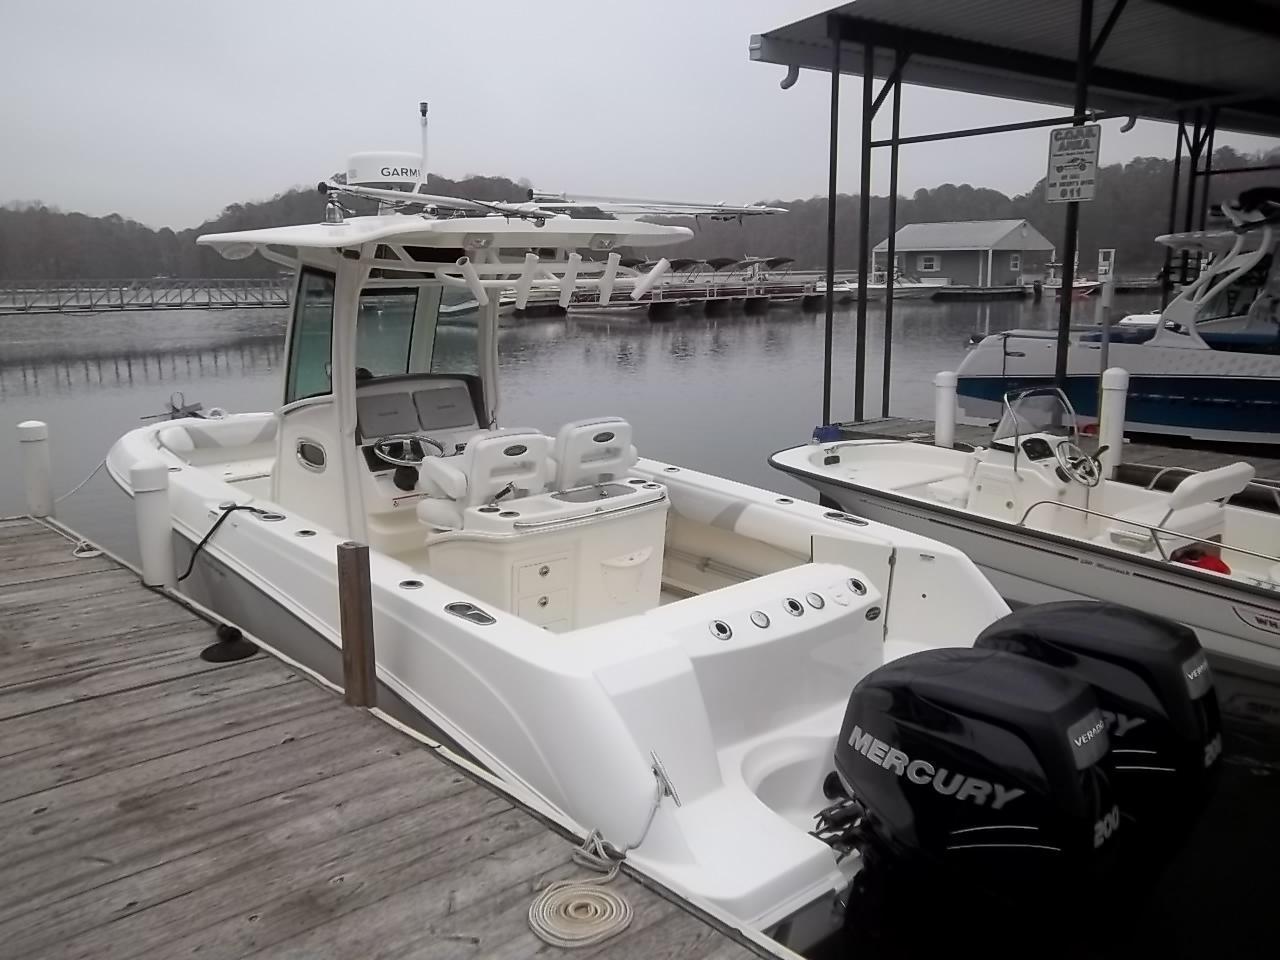 Boston Whaler 25 Outrage, Buford